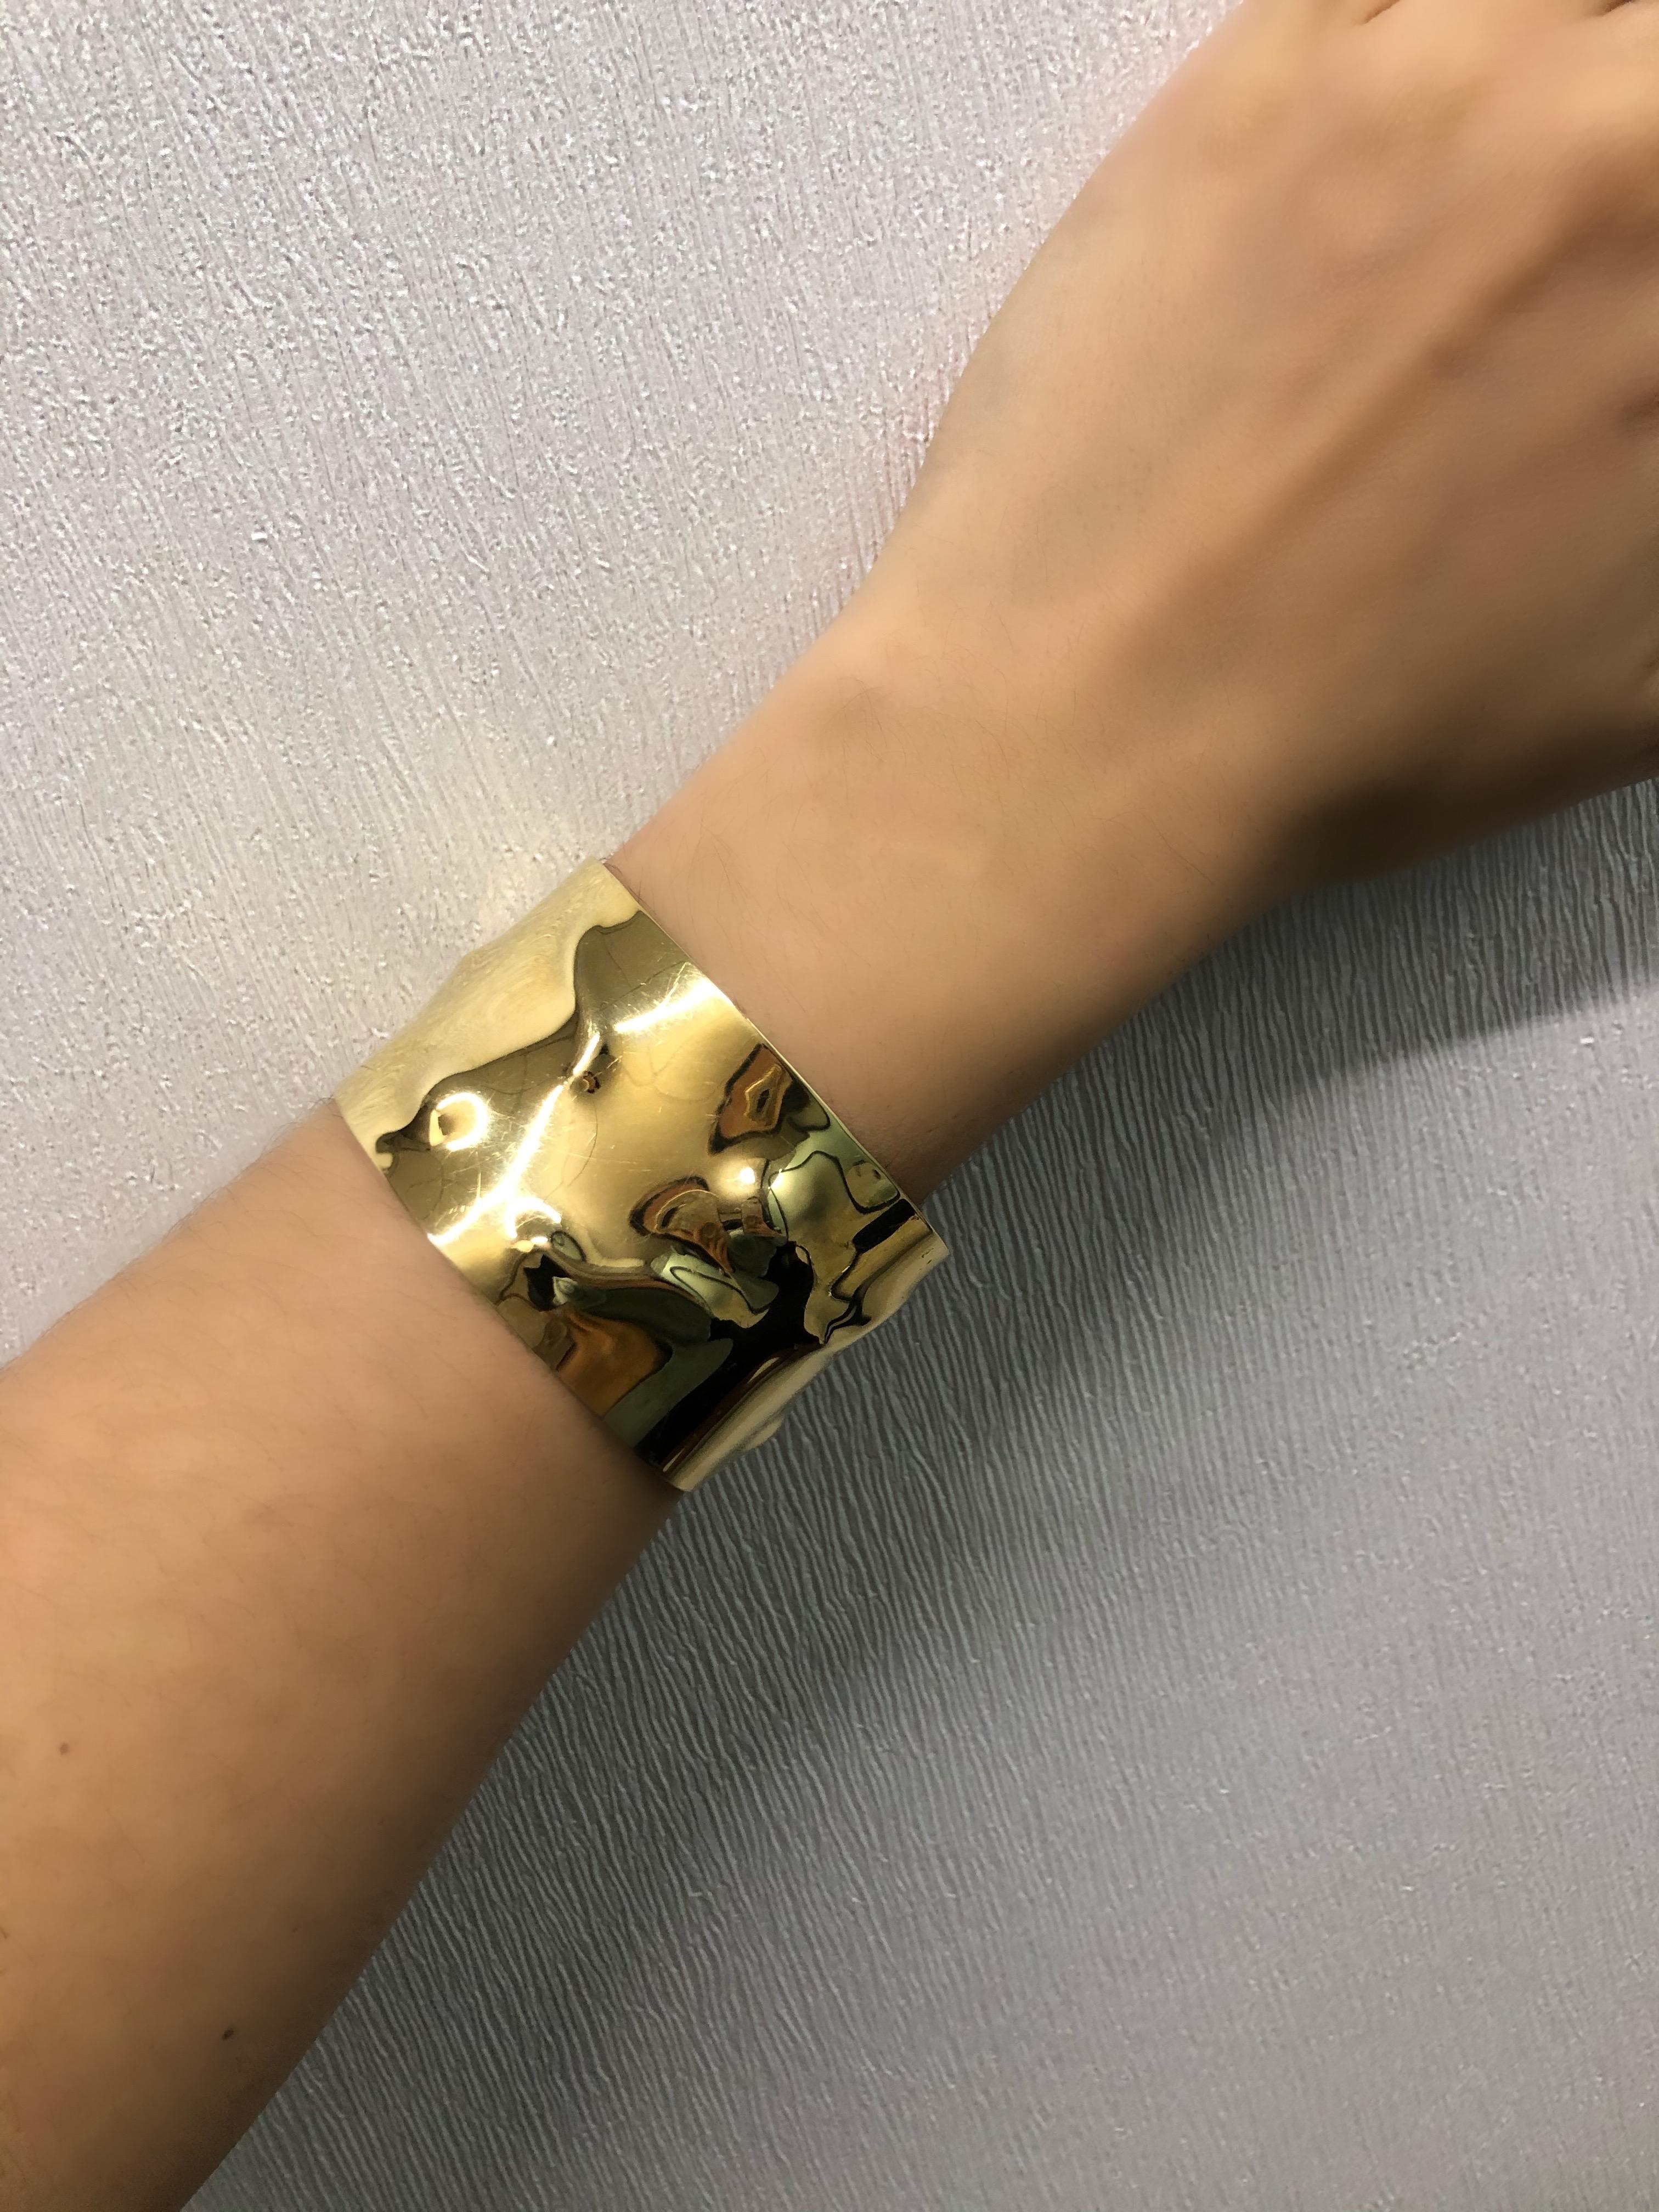 This cuff bracelet features 18 kt., of polished abstract design gold. Signed Cartier. Approximately 50 grams. Inner circle 6 1/2 inches. Width 1 1/2 inches. 

Viewings available in our NYC showroom by appointment.